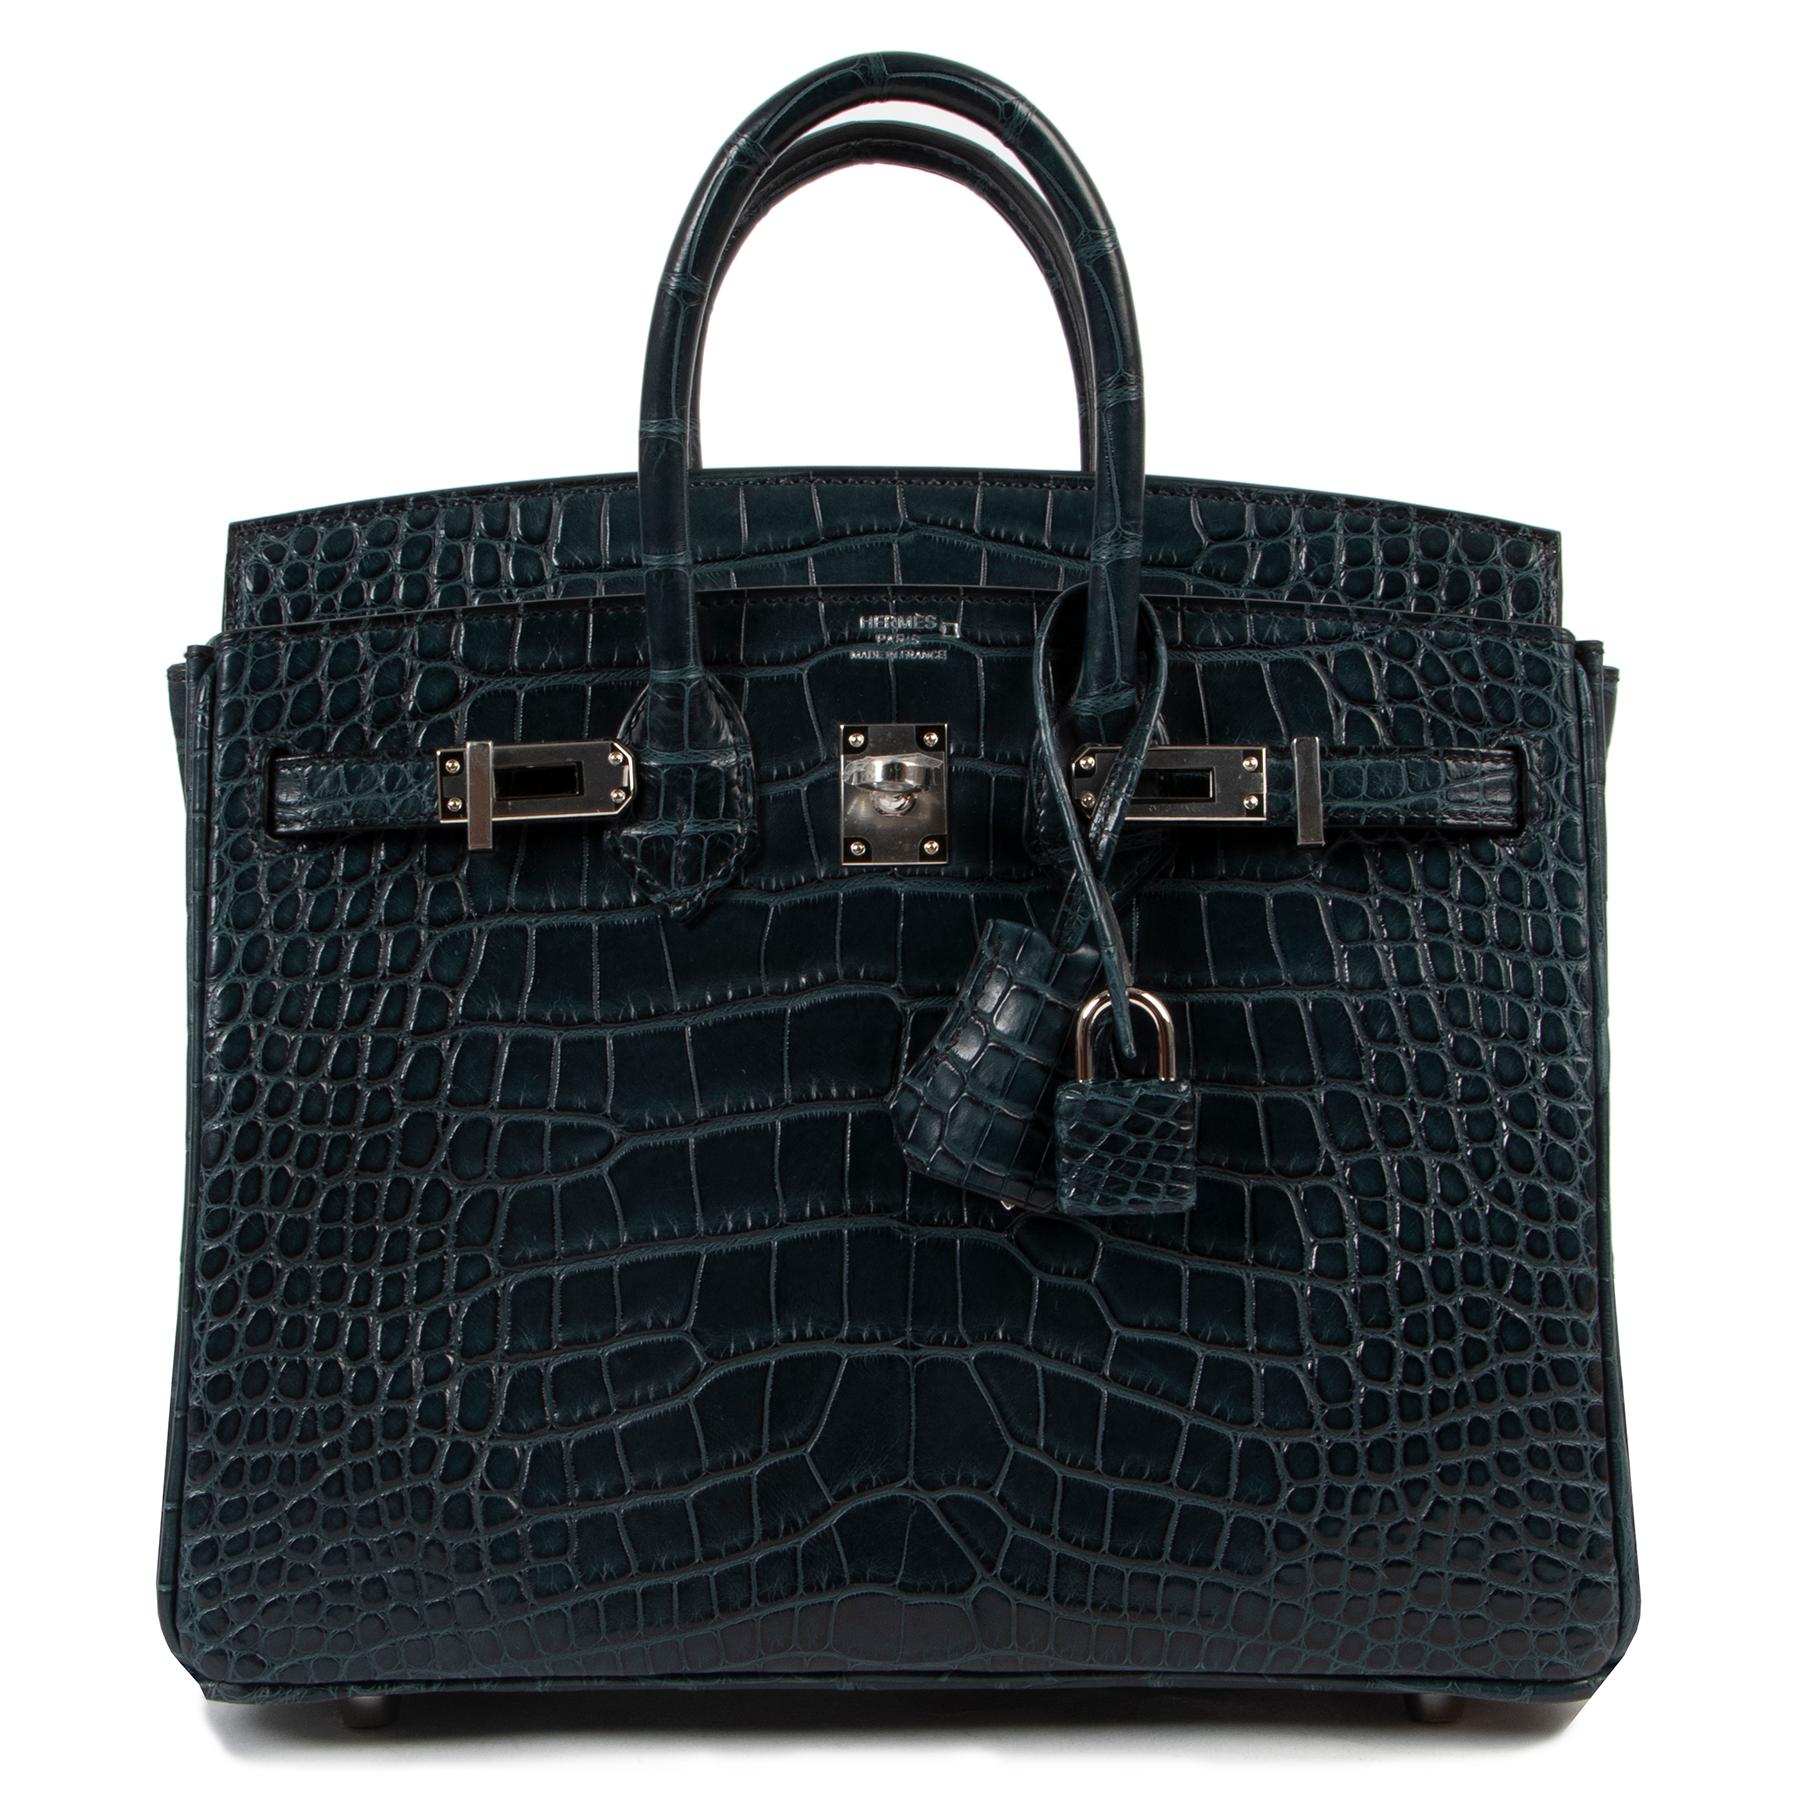 A real eye catcher this very very hard to find Birkin 25cm bag is featured in Vert Rousseau color. 
This bag is made from matte Alligator Mississippi, and is one of the most difficult exotic piece to obtain. The beautiful matte croco leather will